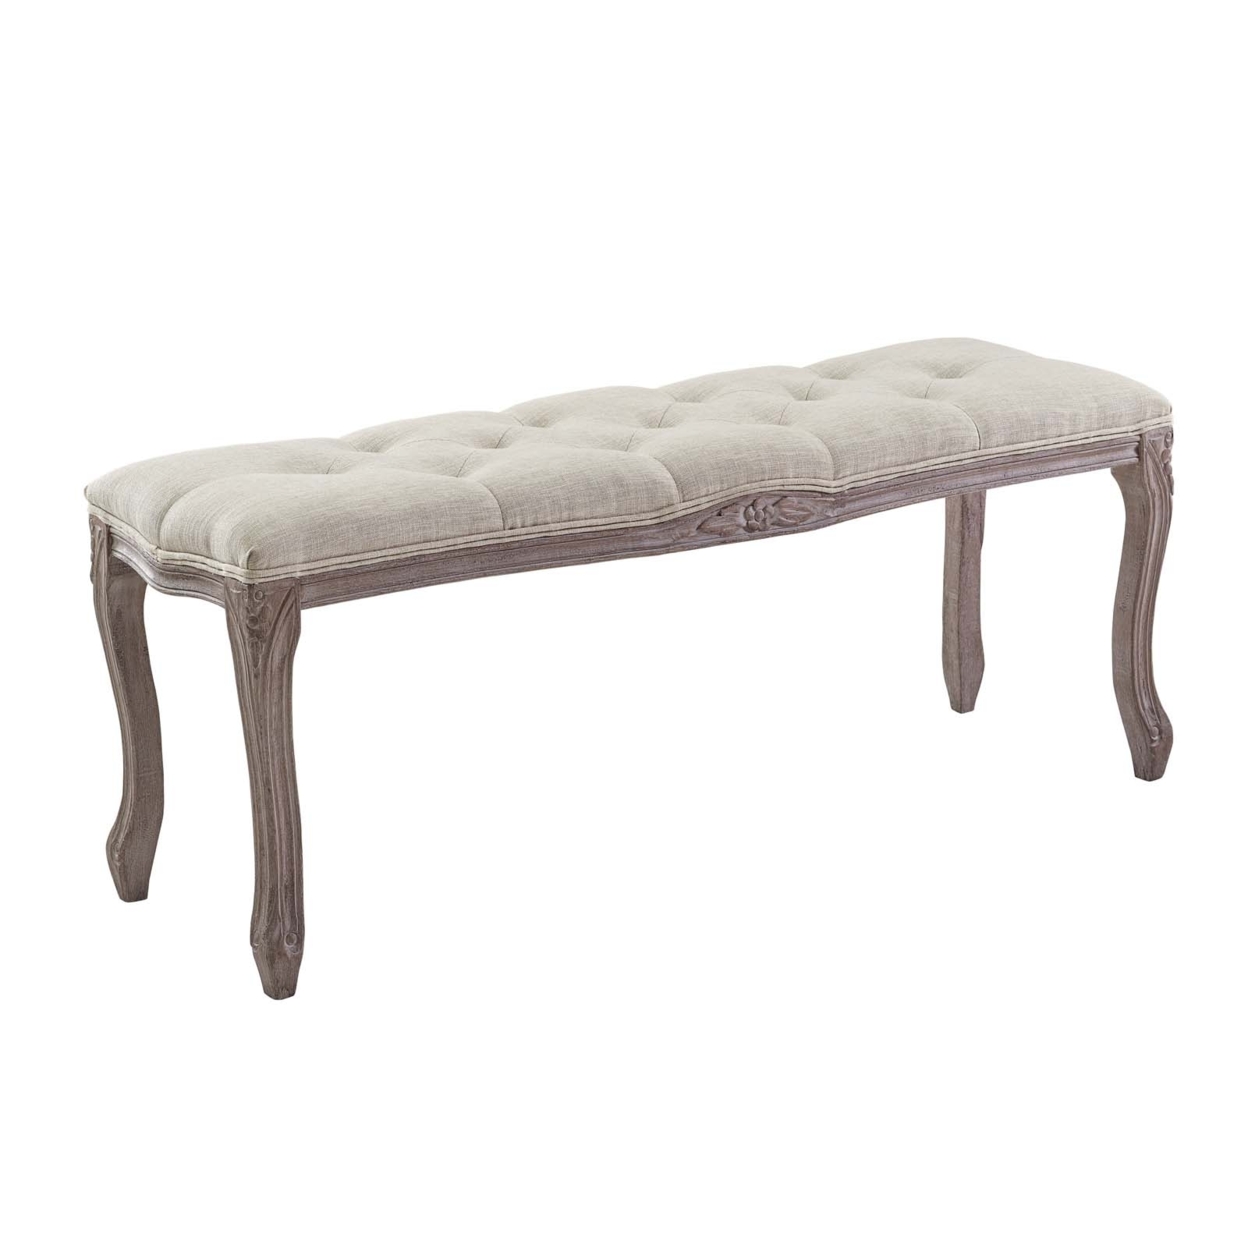 Regal Vintage French Upholstered Fabric Bench, Beige